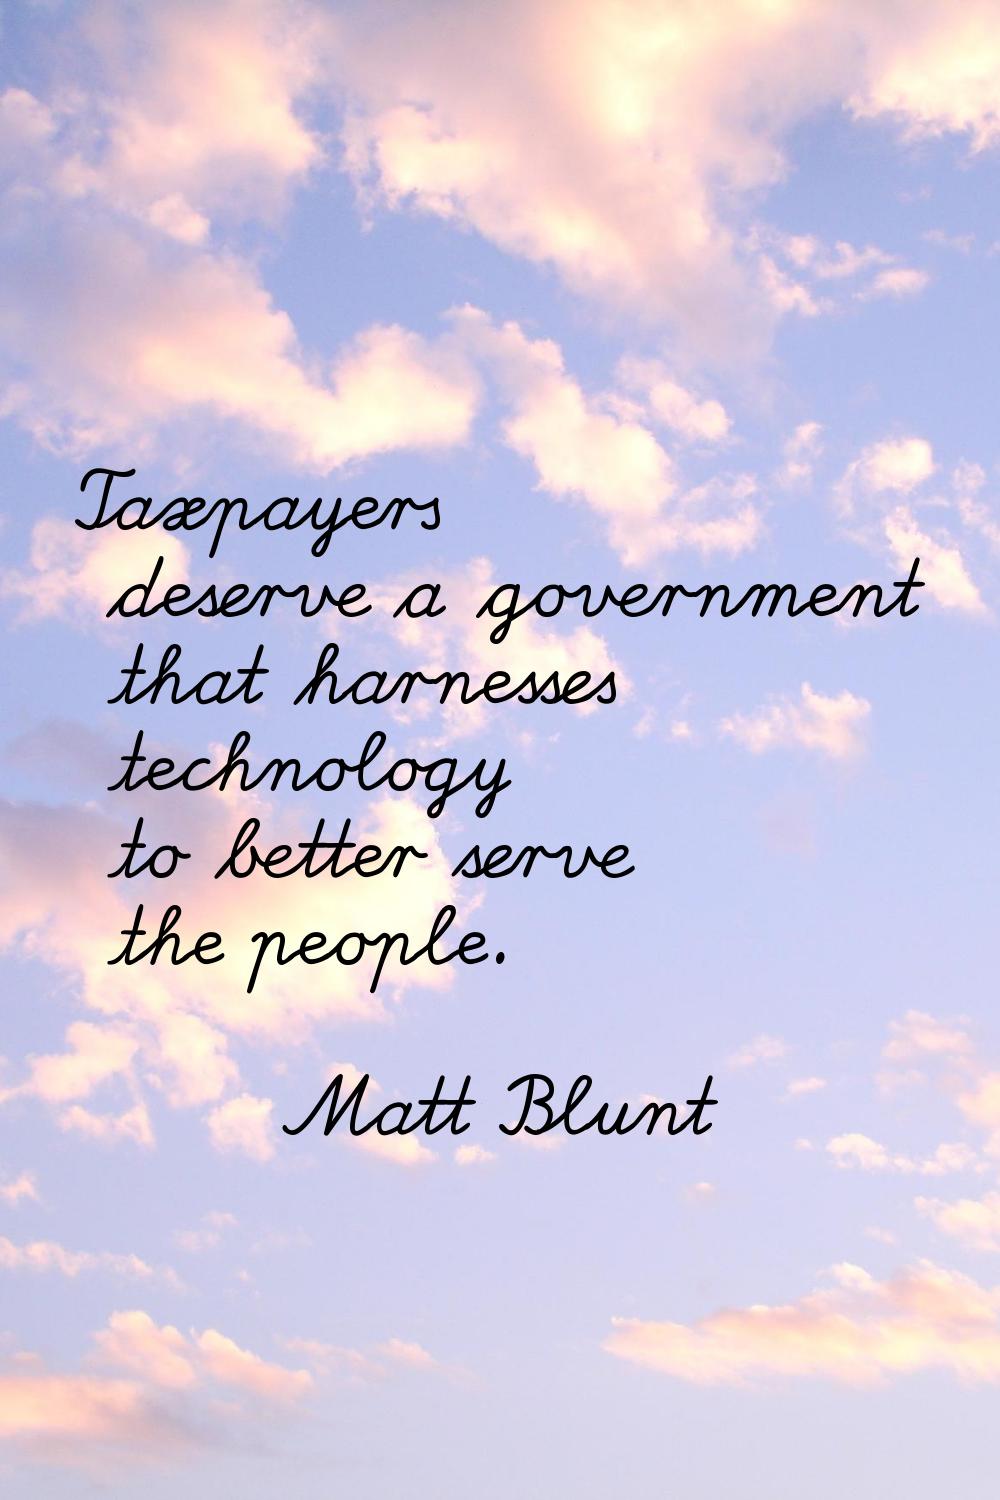 Taxpayers deserve a government that harnesses technology to better serve the people.